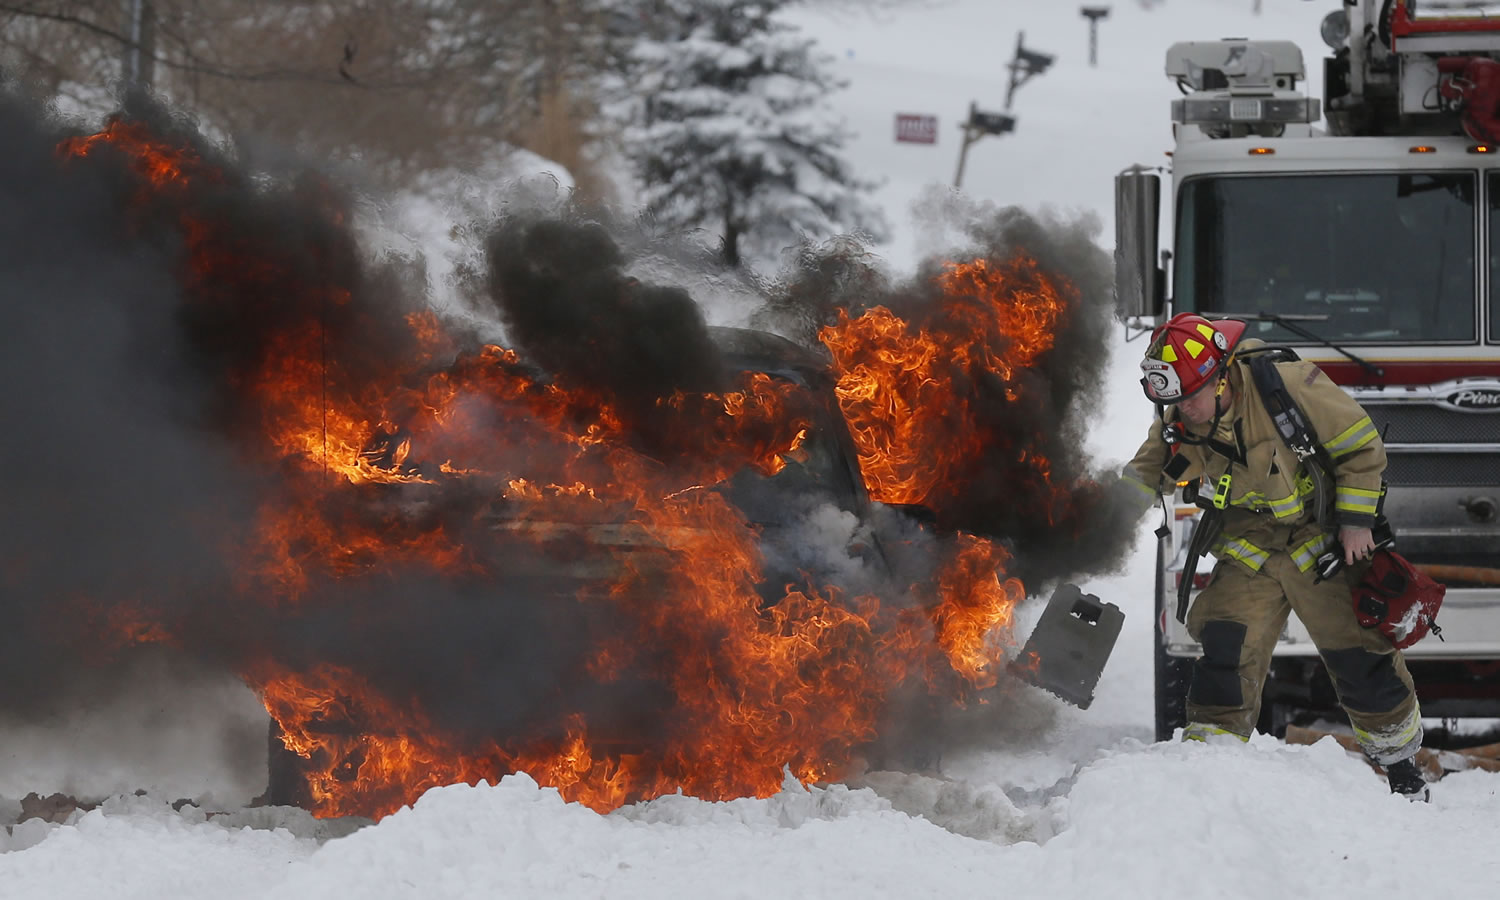 A Lawrence firefighter places wheel blocks as he prepares to extinguish a vehicle fire in Lawrence, Kan., on Thursday.